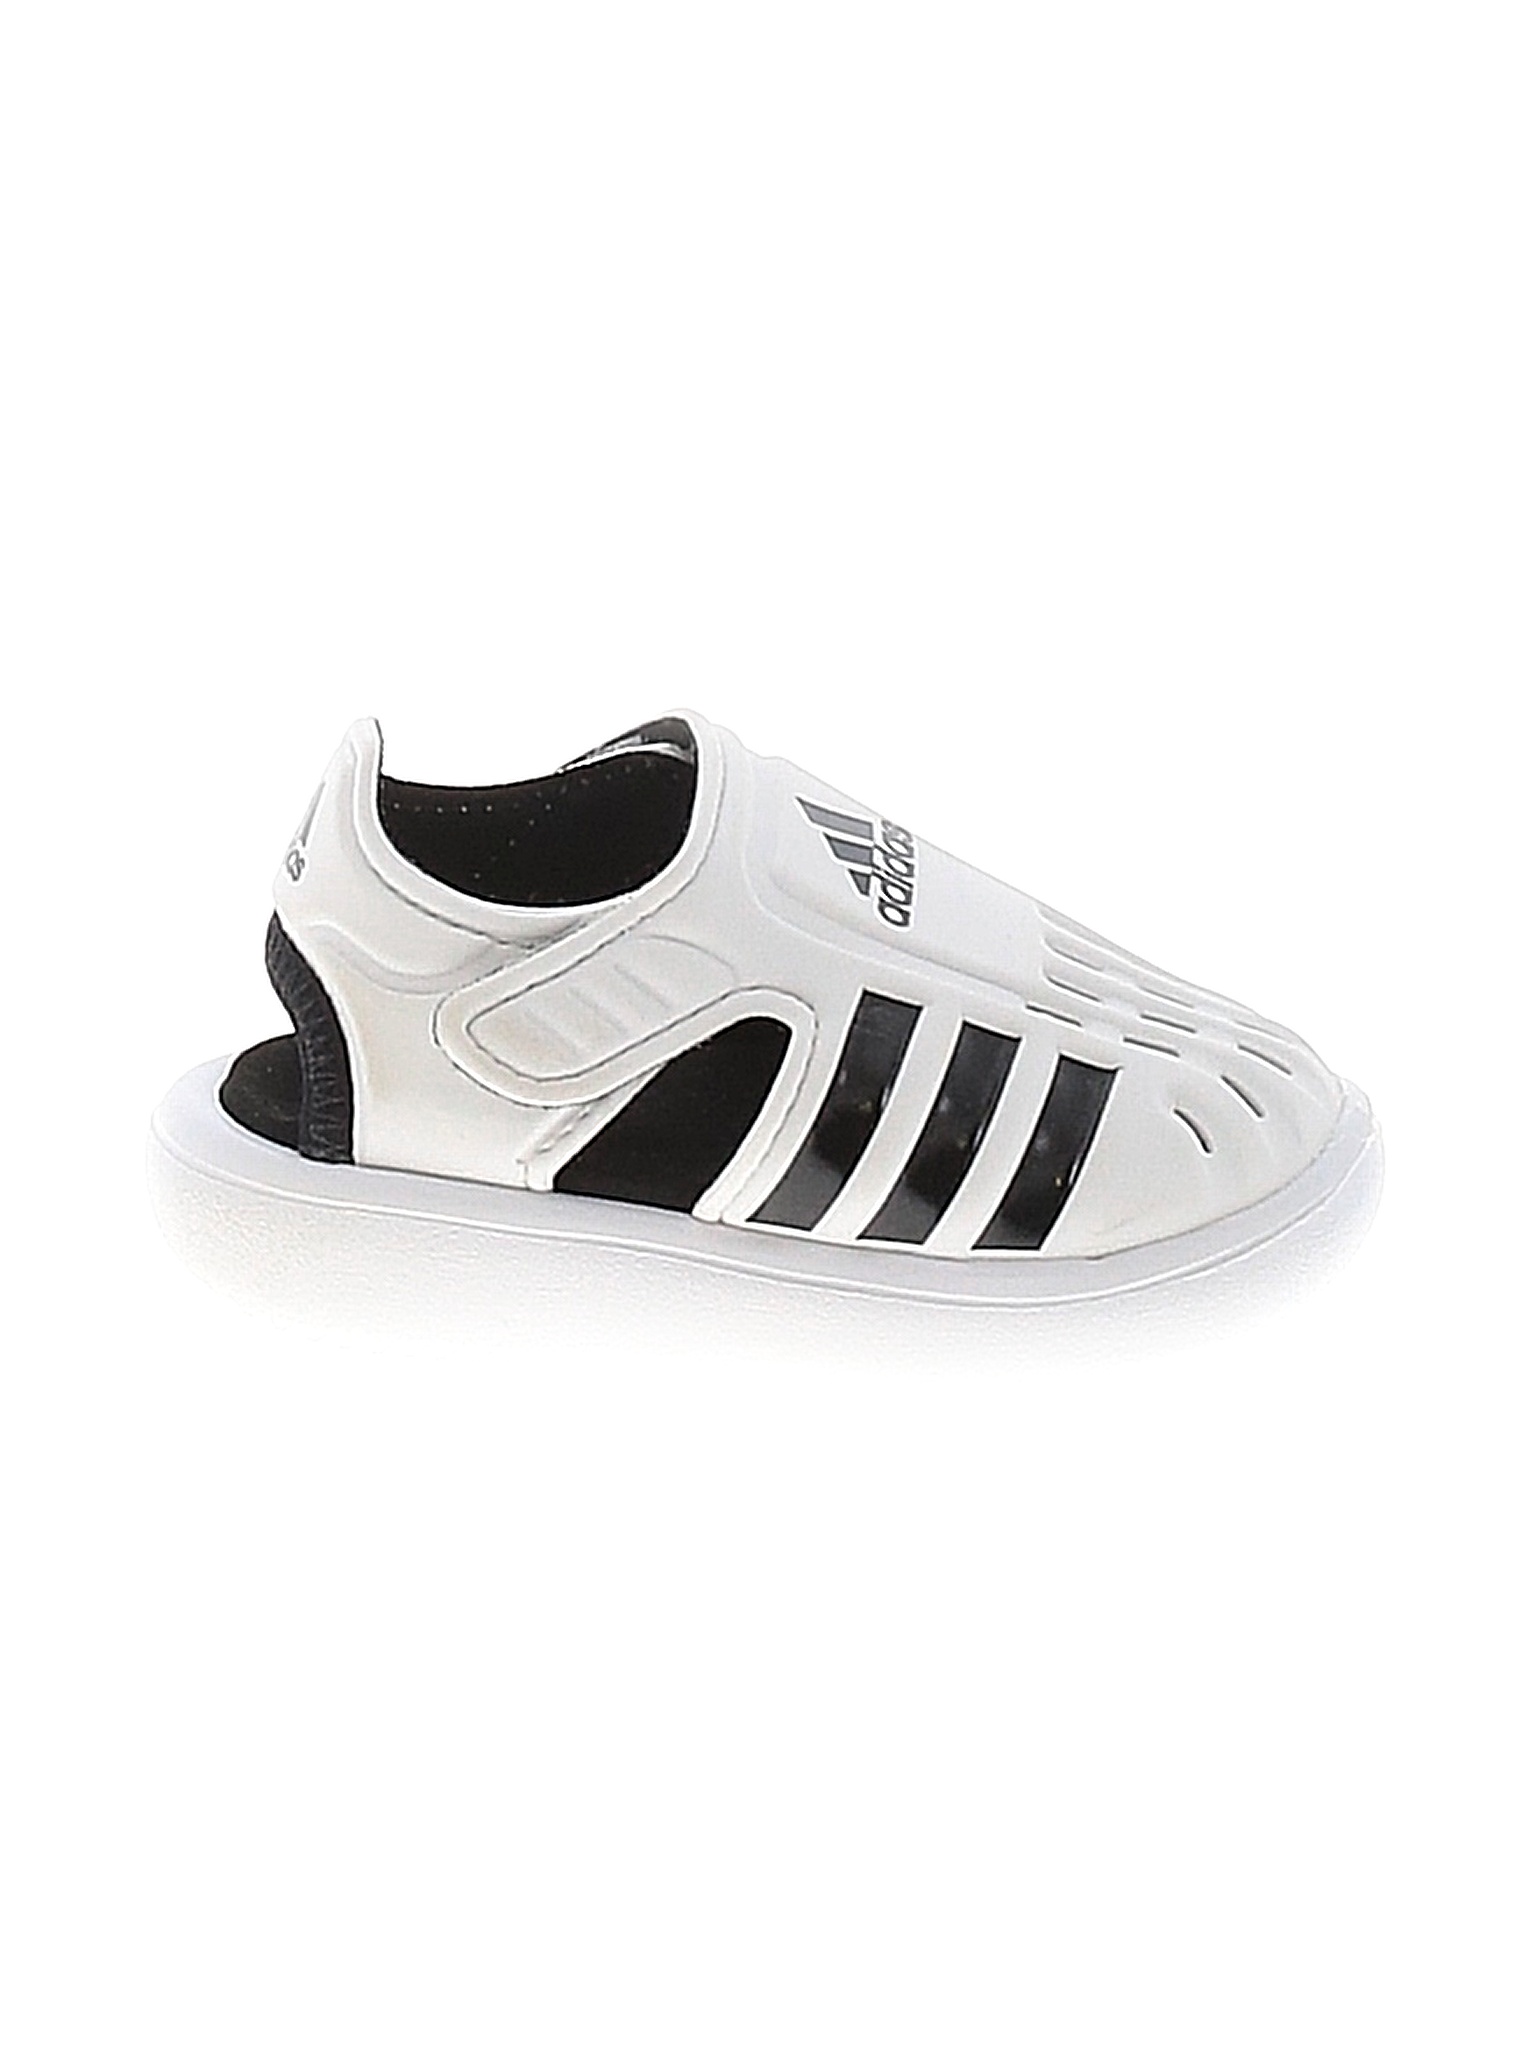 salty tight Tree Adidas Boys' Shoes On Sale Up To 90% Off Retail | thredUP